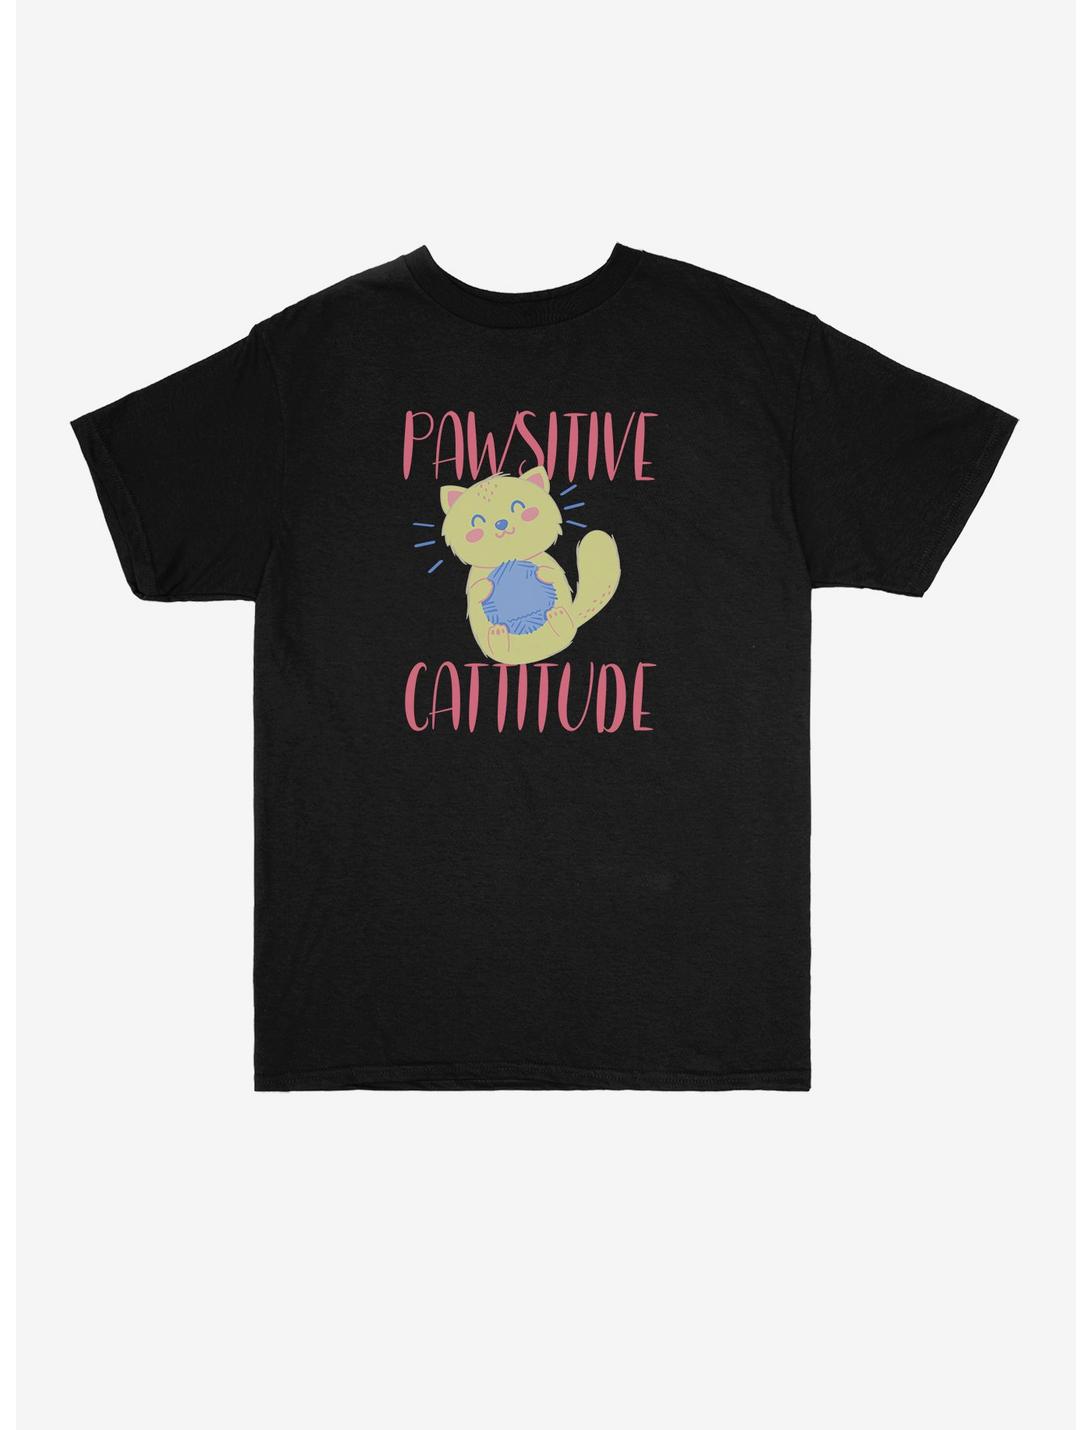 Pawsitive Cattitude Youth T-Shirt, , hi-res